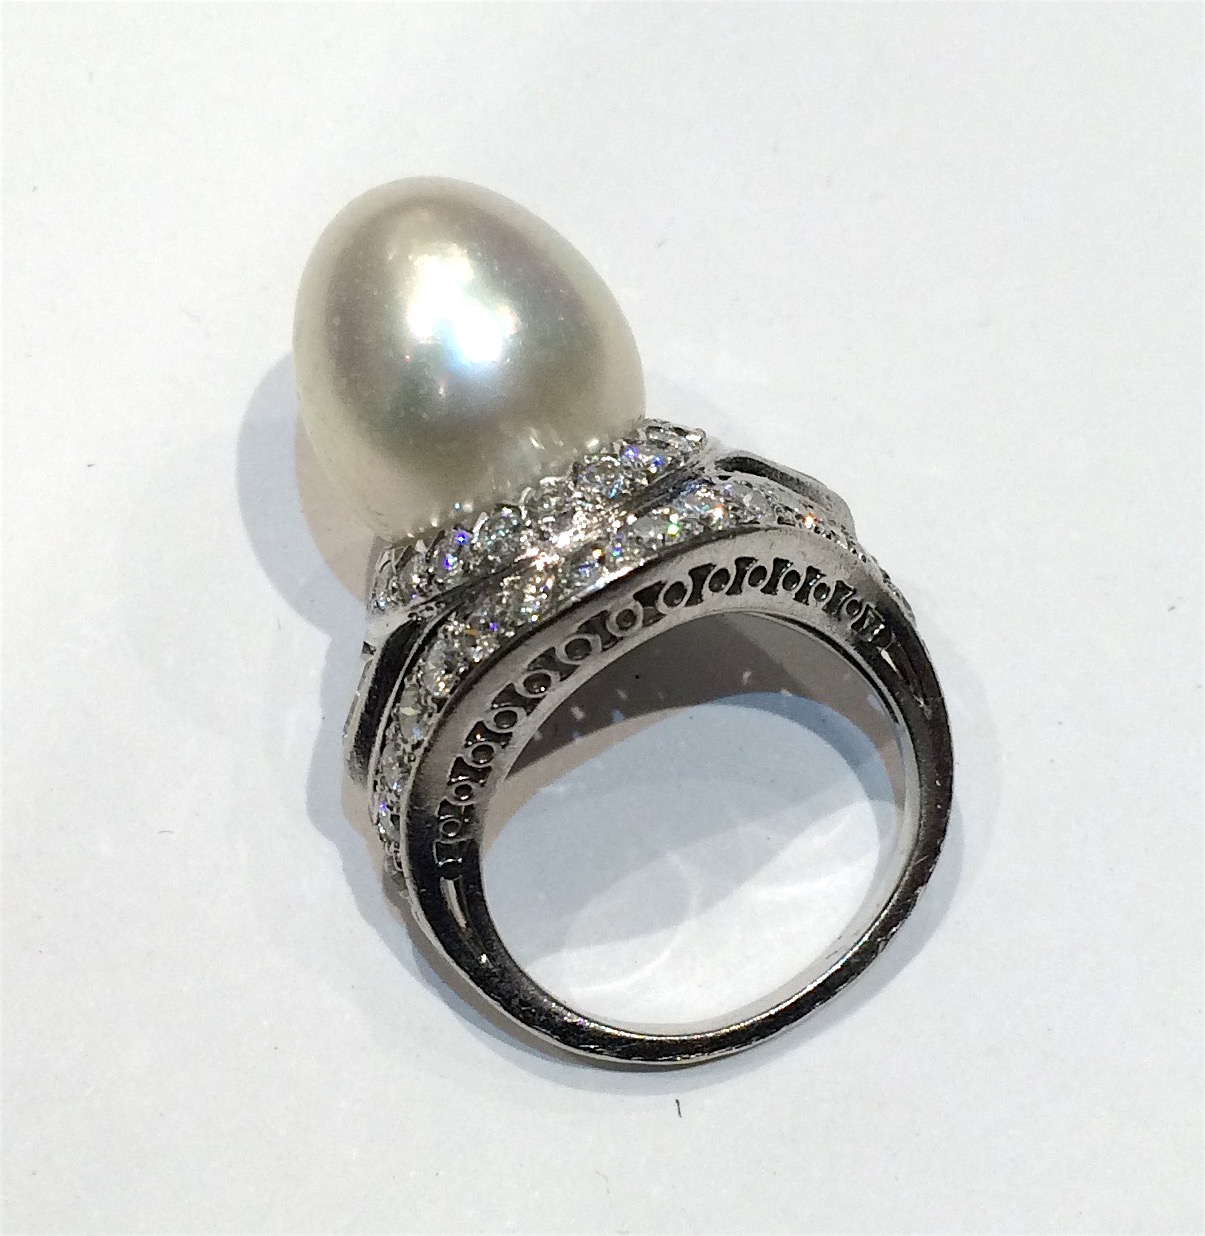 French 1950’s “Turban Style” ring, large pearl (G.I.A. certificate, Weight of the pearl: 16 grams, bead cultured pearl, saltwater, drop shape, white color, “Orient” overtone) and fancy diamond ring set with two triangle diamonds (approx. 2 carats TW) and 48 round diamonds (approx. 8 carats TW) all set in platinum, signed